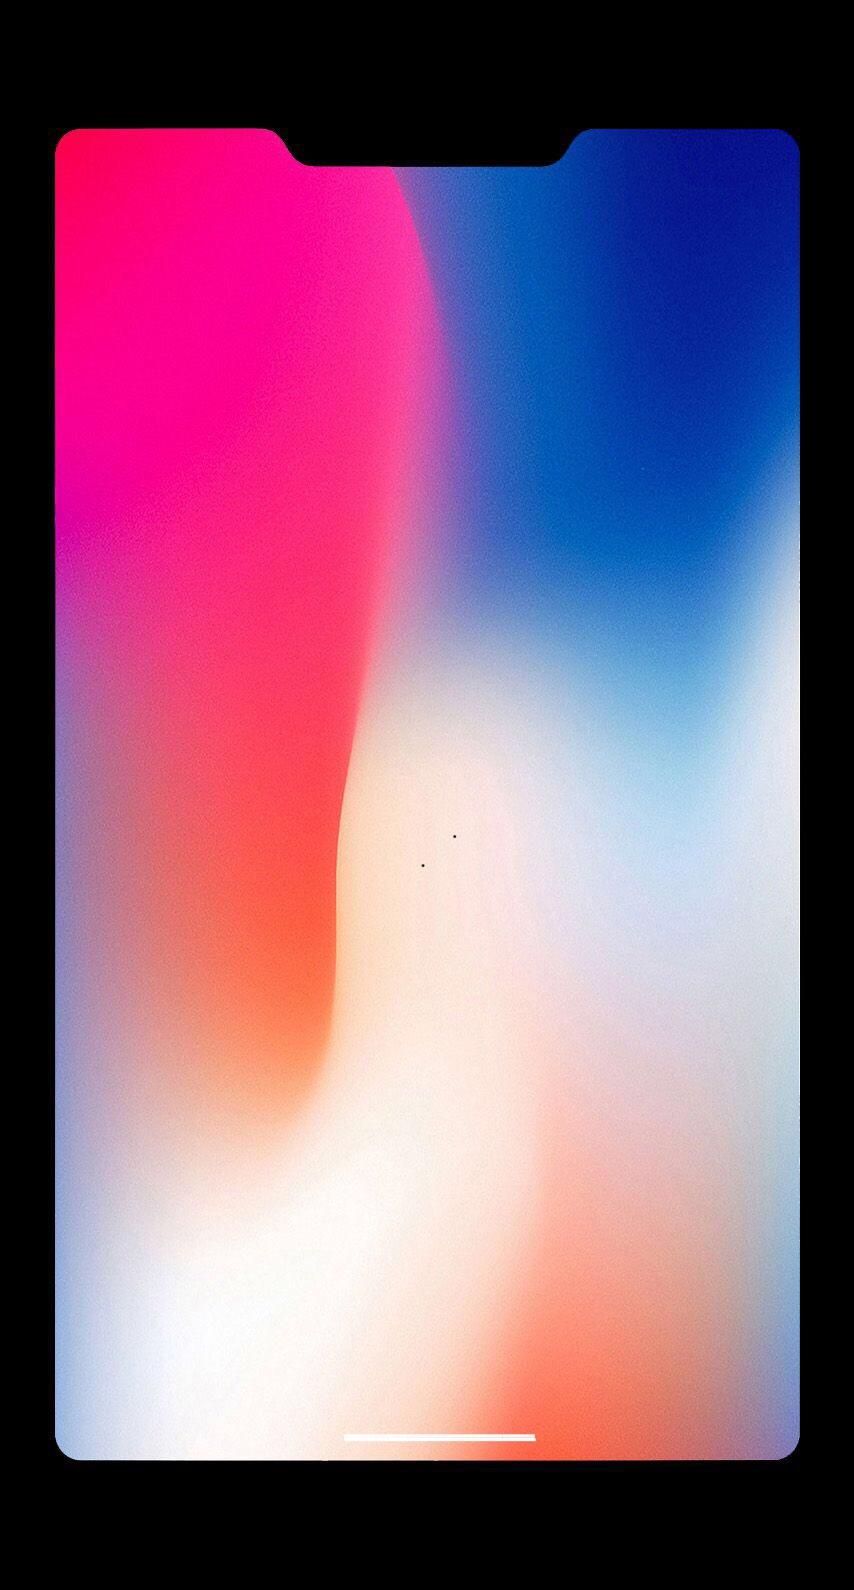 wallpaper with notch